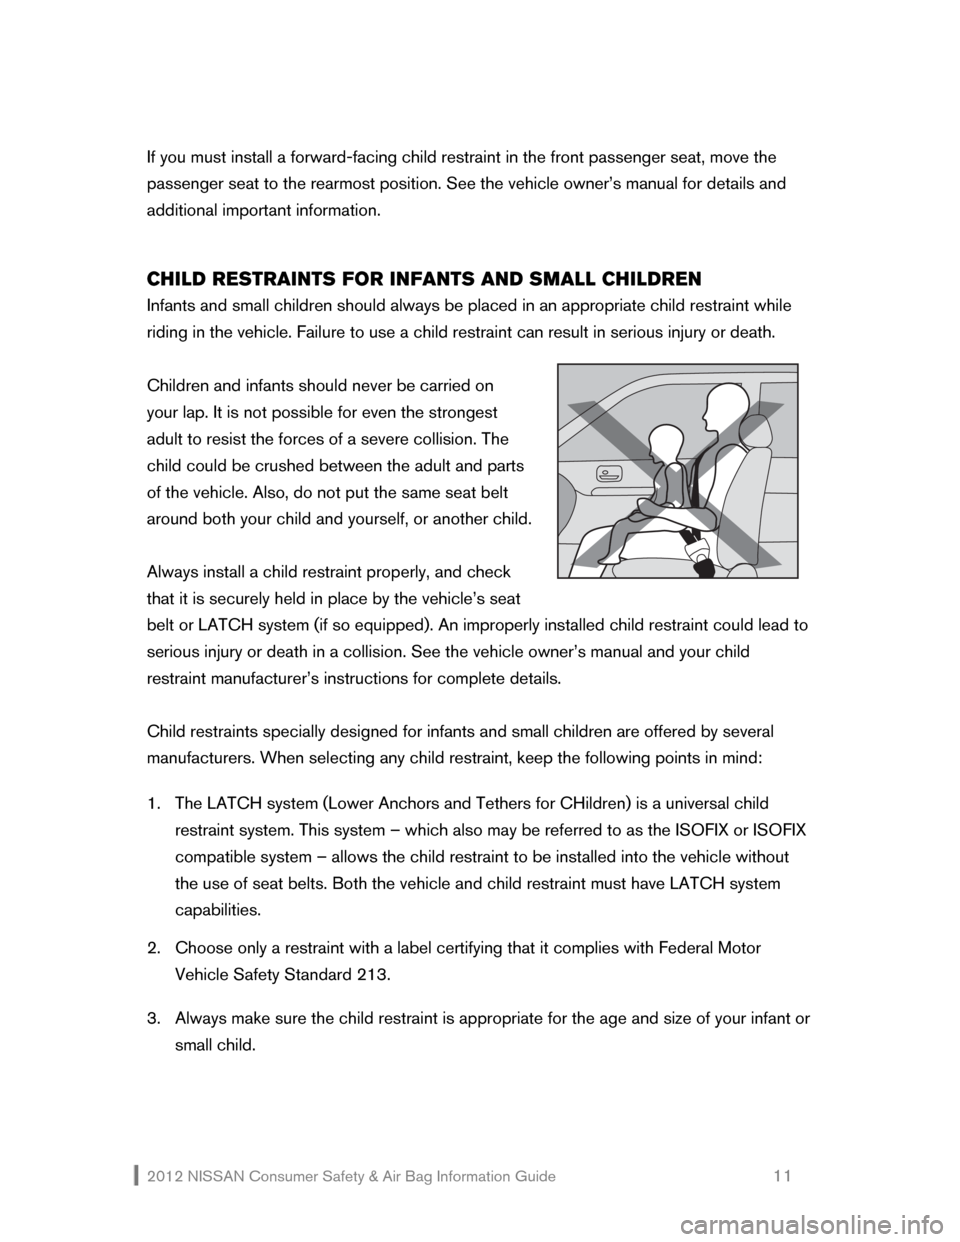 NISSAN XTERRA 2012 N50 / 2.G Consumer Safety Air Bag Information Guide 2012 NISSAN Consumer Safety & Air Bag Information Guide                                                   11 
If you must install a forward-facing child restraint in the front passenger seat, move the